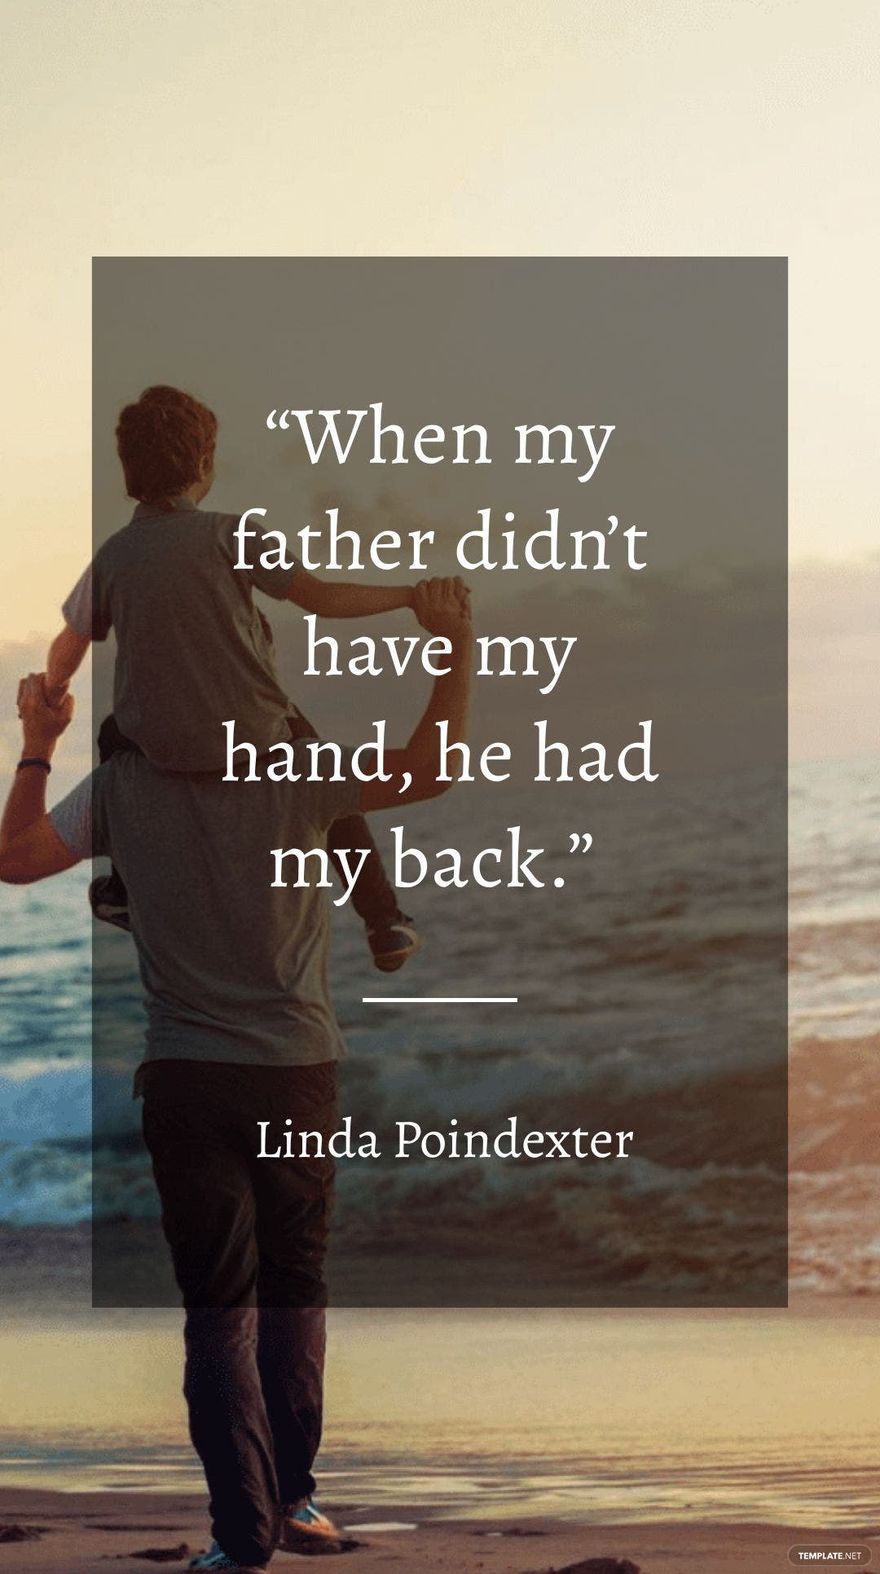 Linda Poindexter - When my father didn’t have my hand, he had my back.